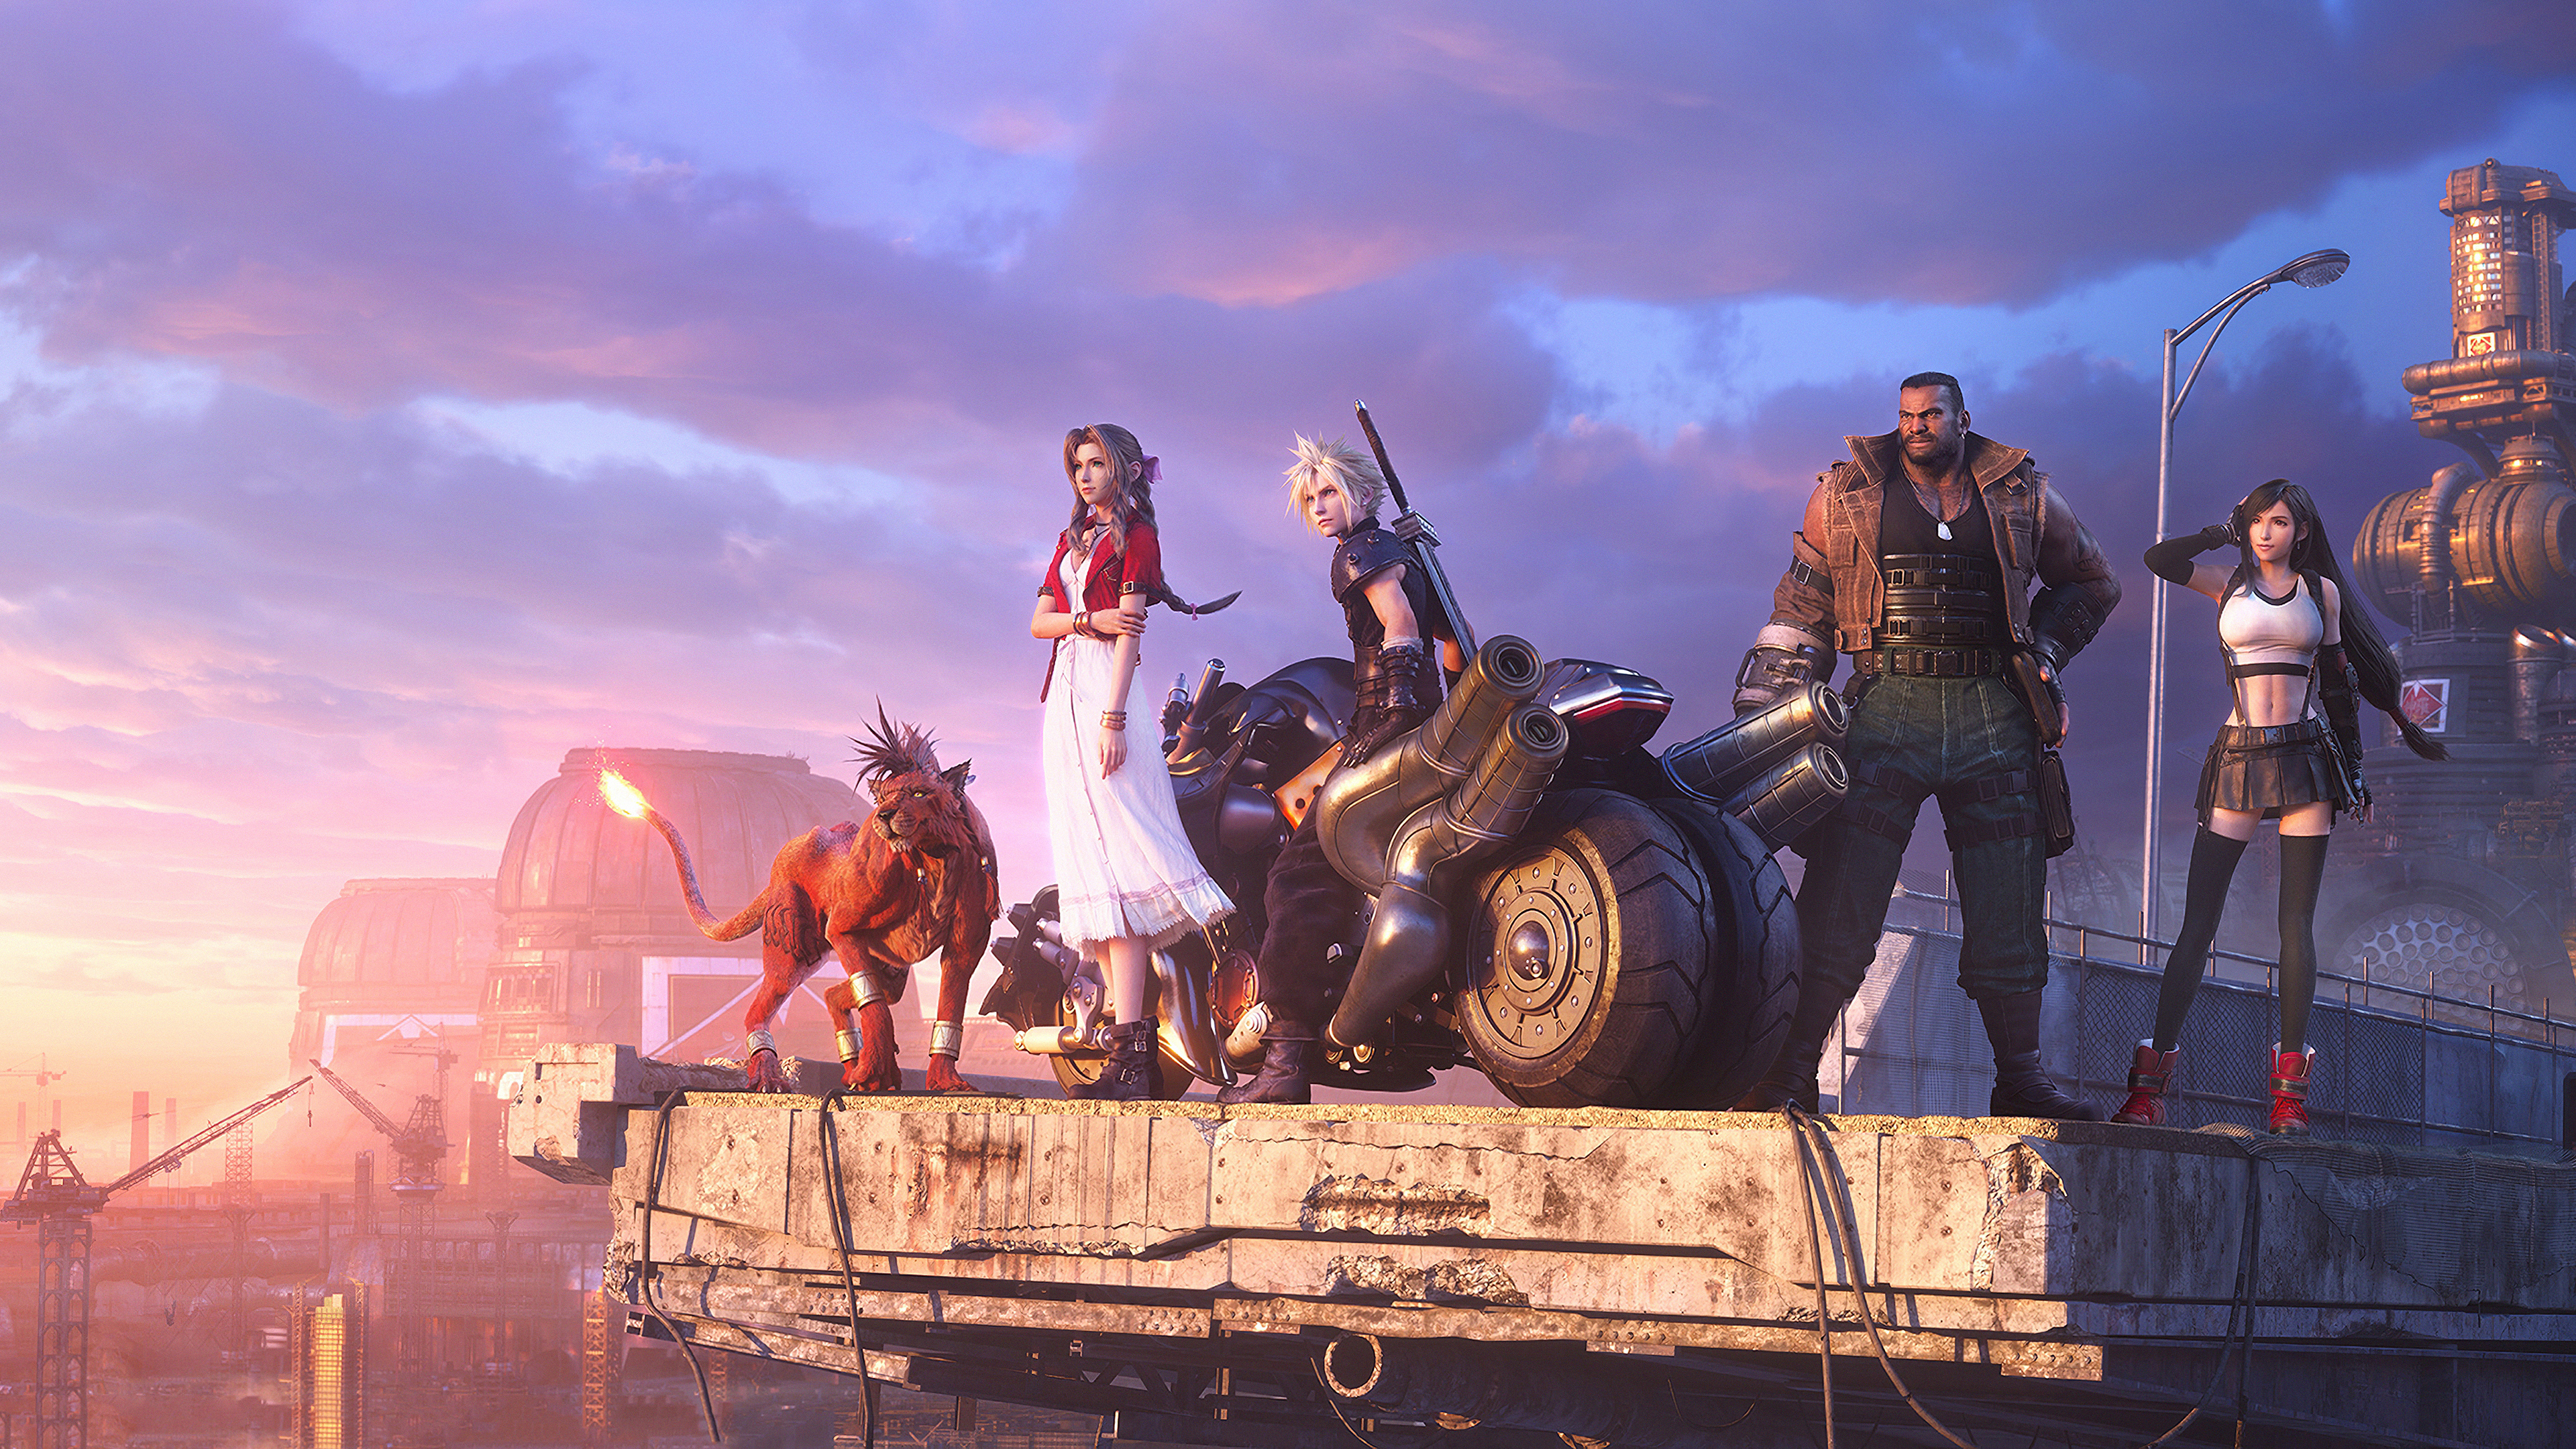 General 3840x2160 Final Fantasy VII PlayStation video games Final Fantasy VII: Remake Aerith Gainsborough Cloud Strife Barret Wallace Tifa Lockhart Square Enix video game characters